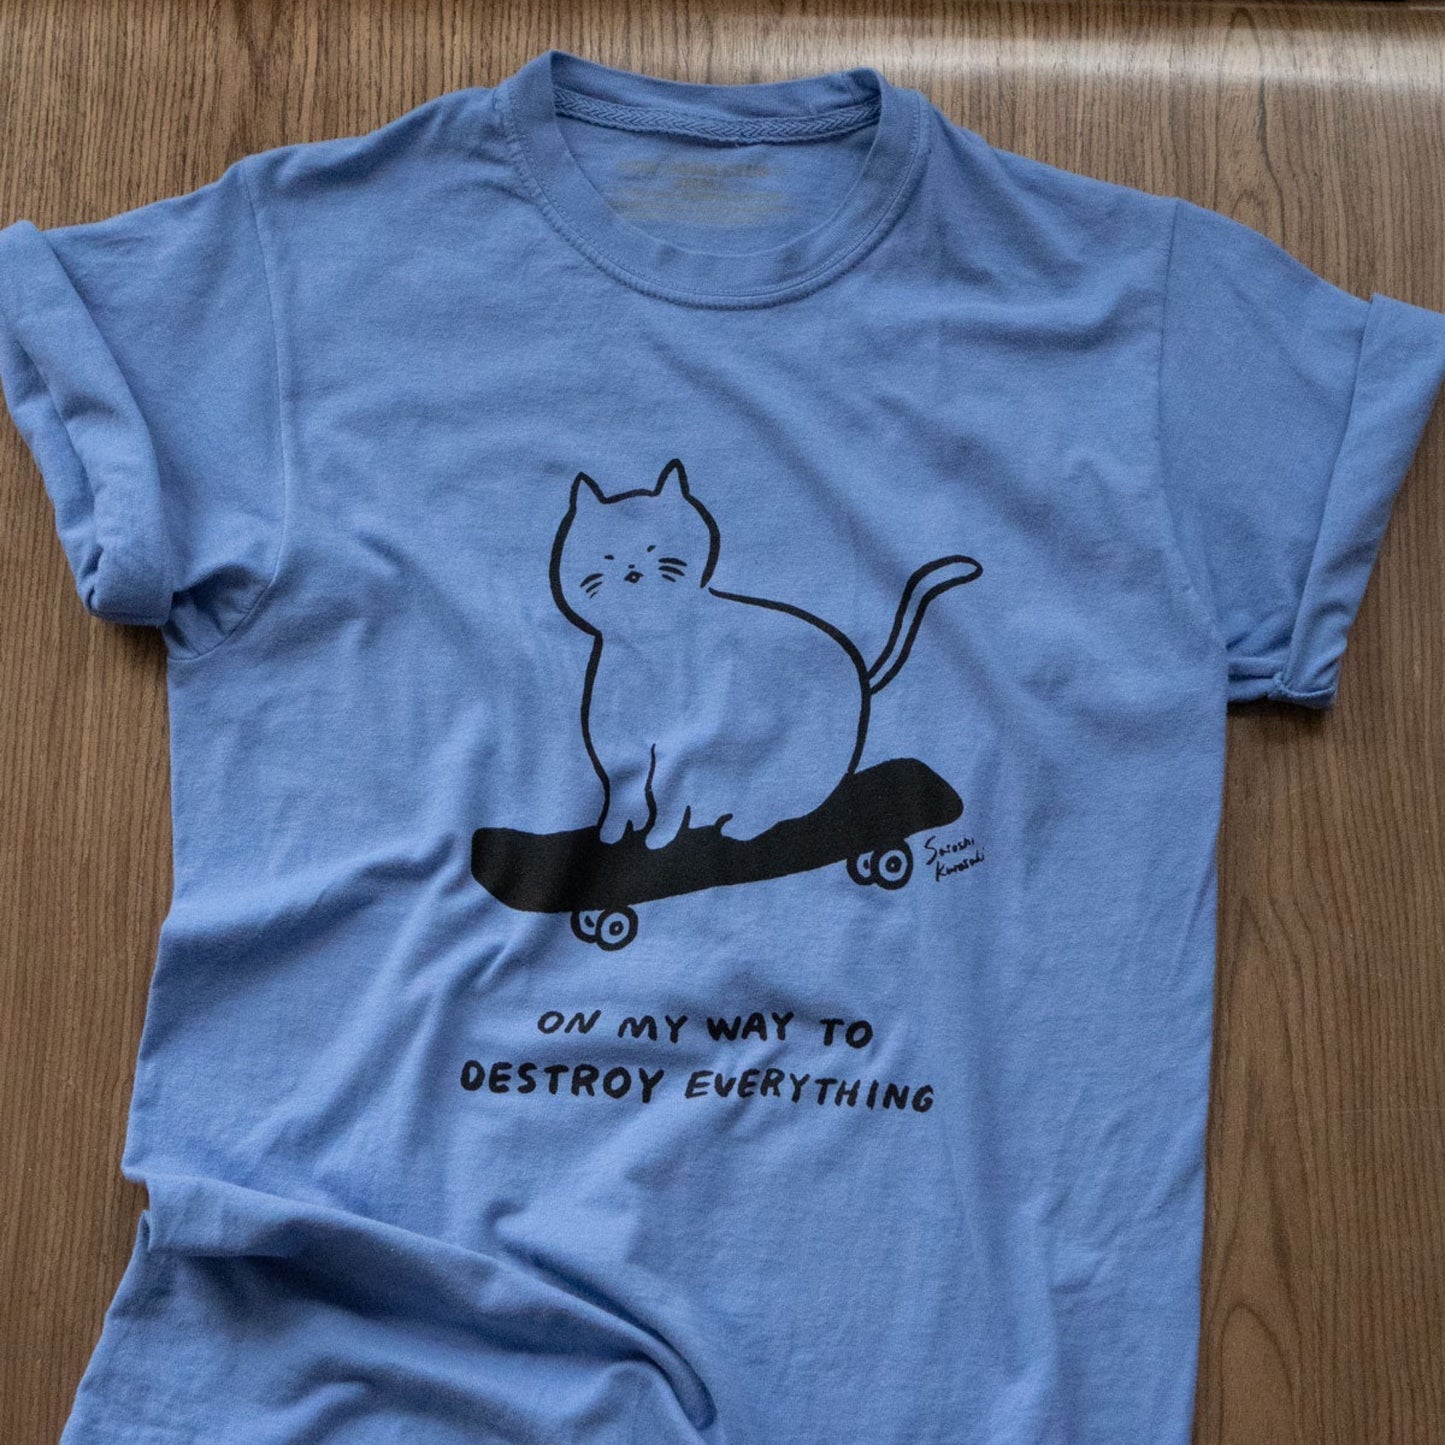 Skateboard Cat Unisex T-Shirt ‘On My Way to Destroy Everything'